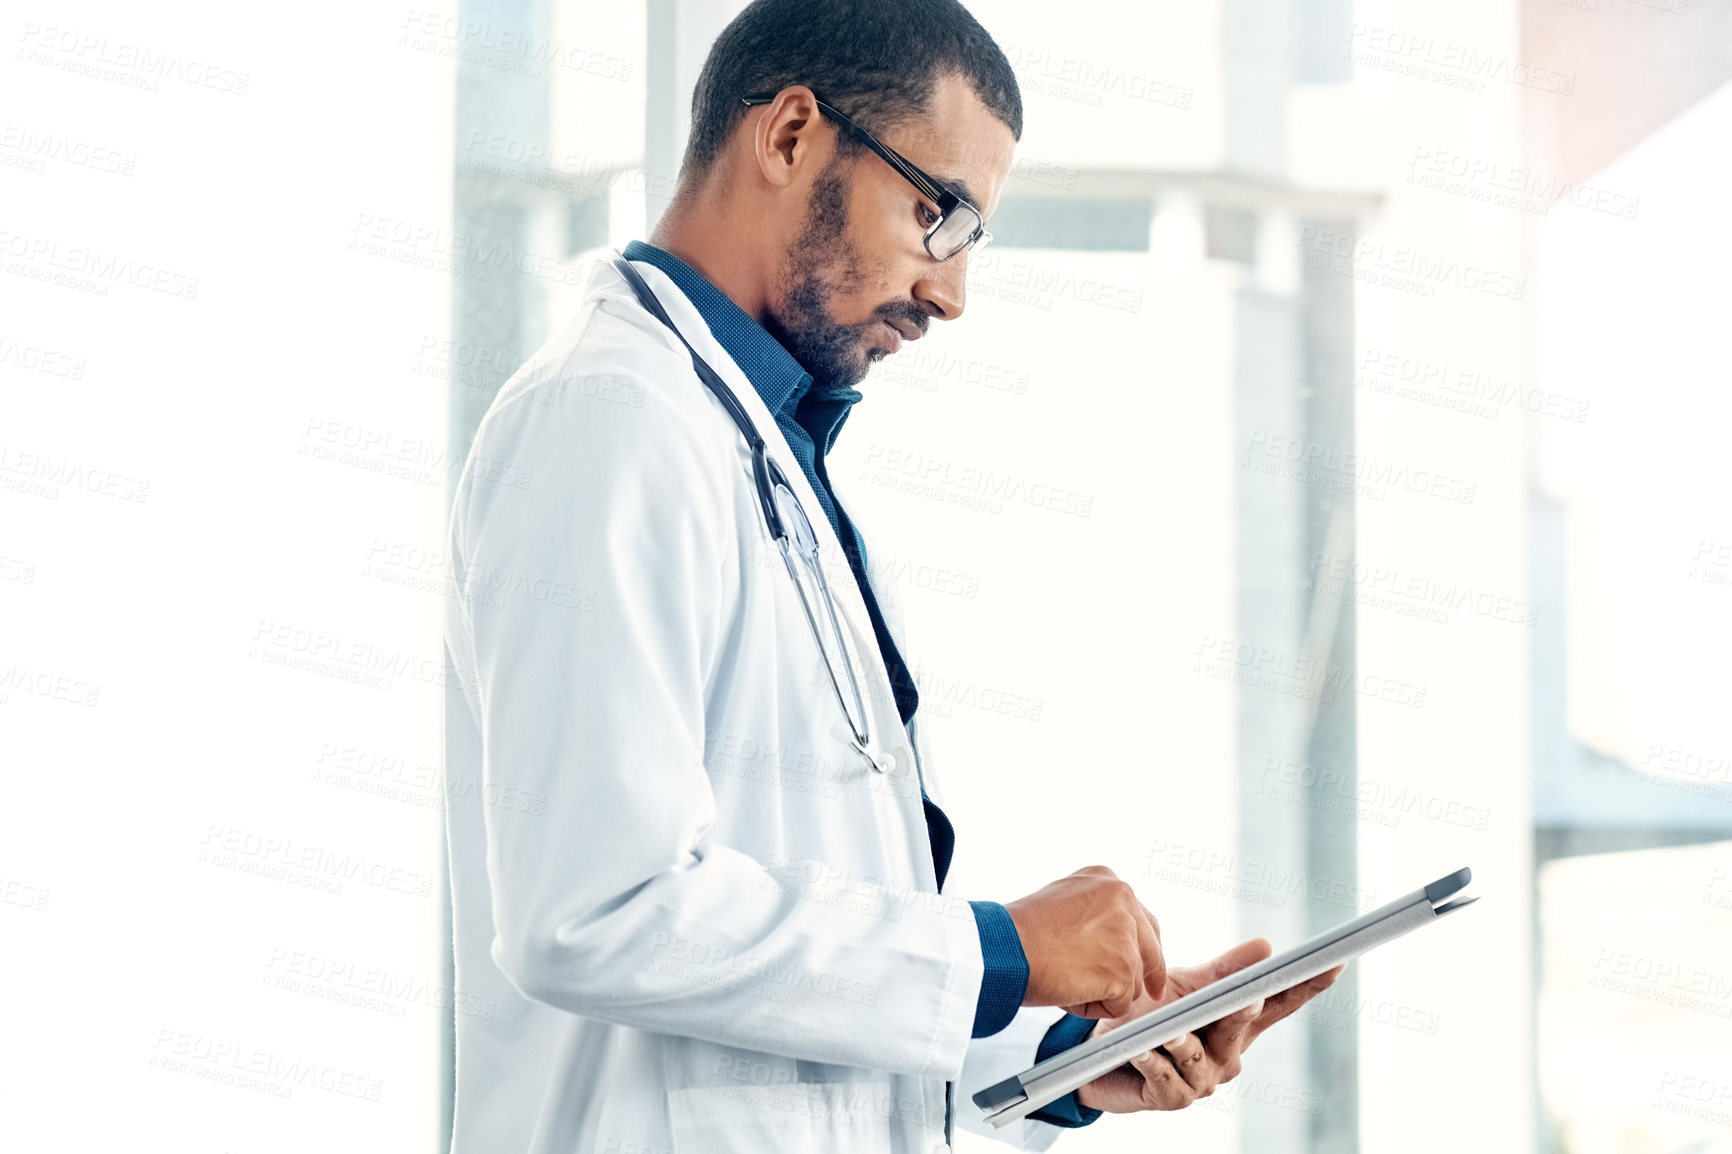 Buy stock photo Shot of a young doctor using a digital tablet in a modern hospital